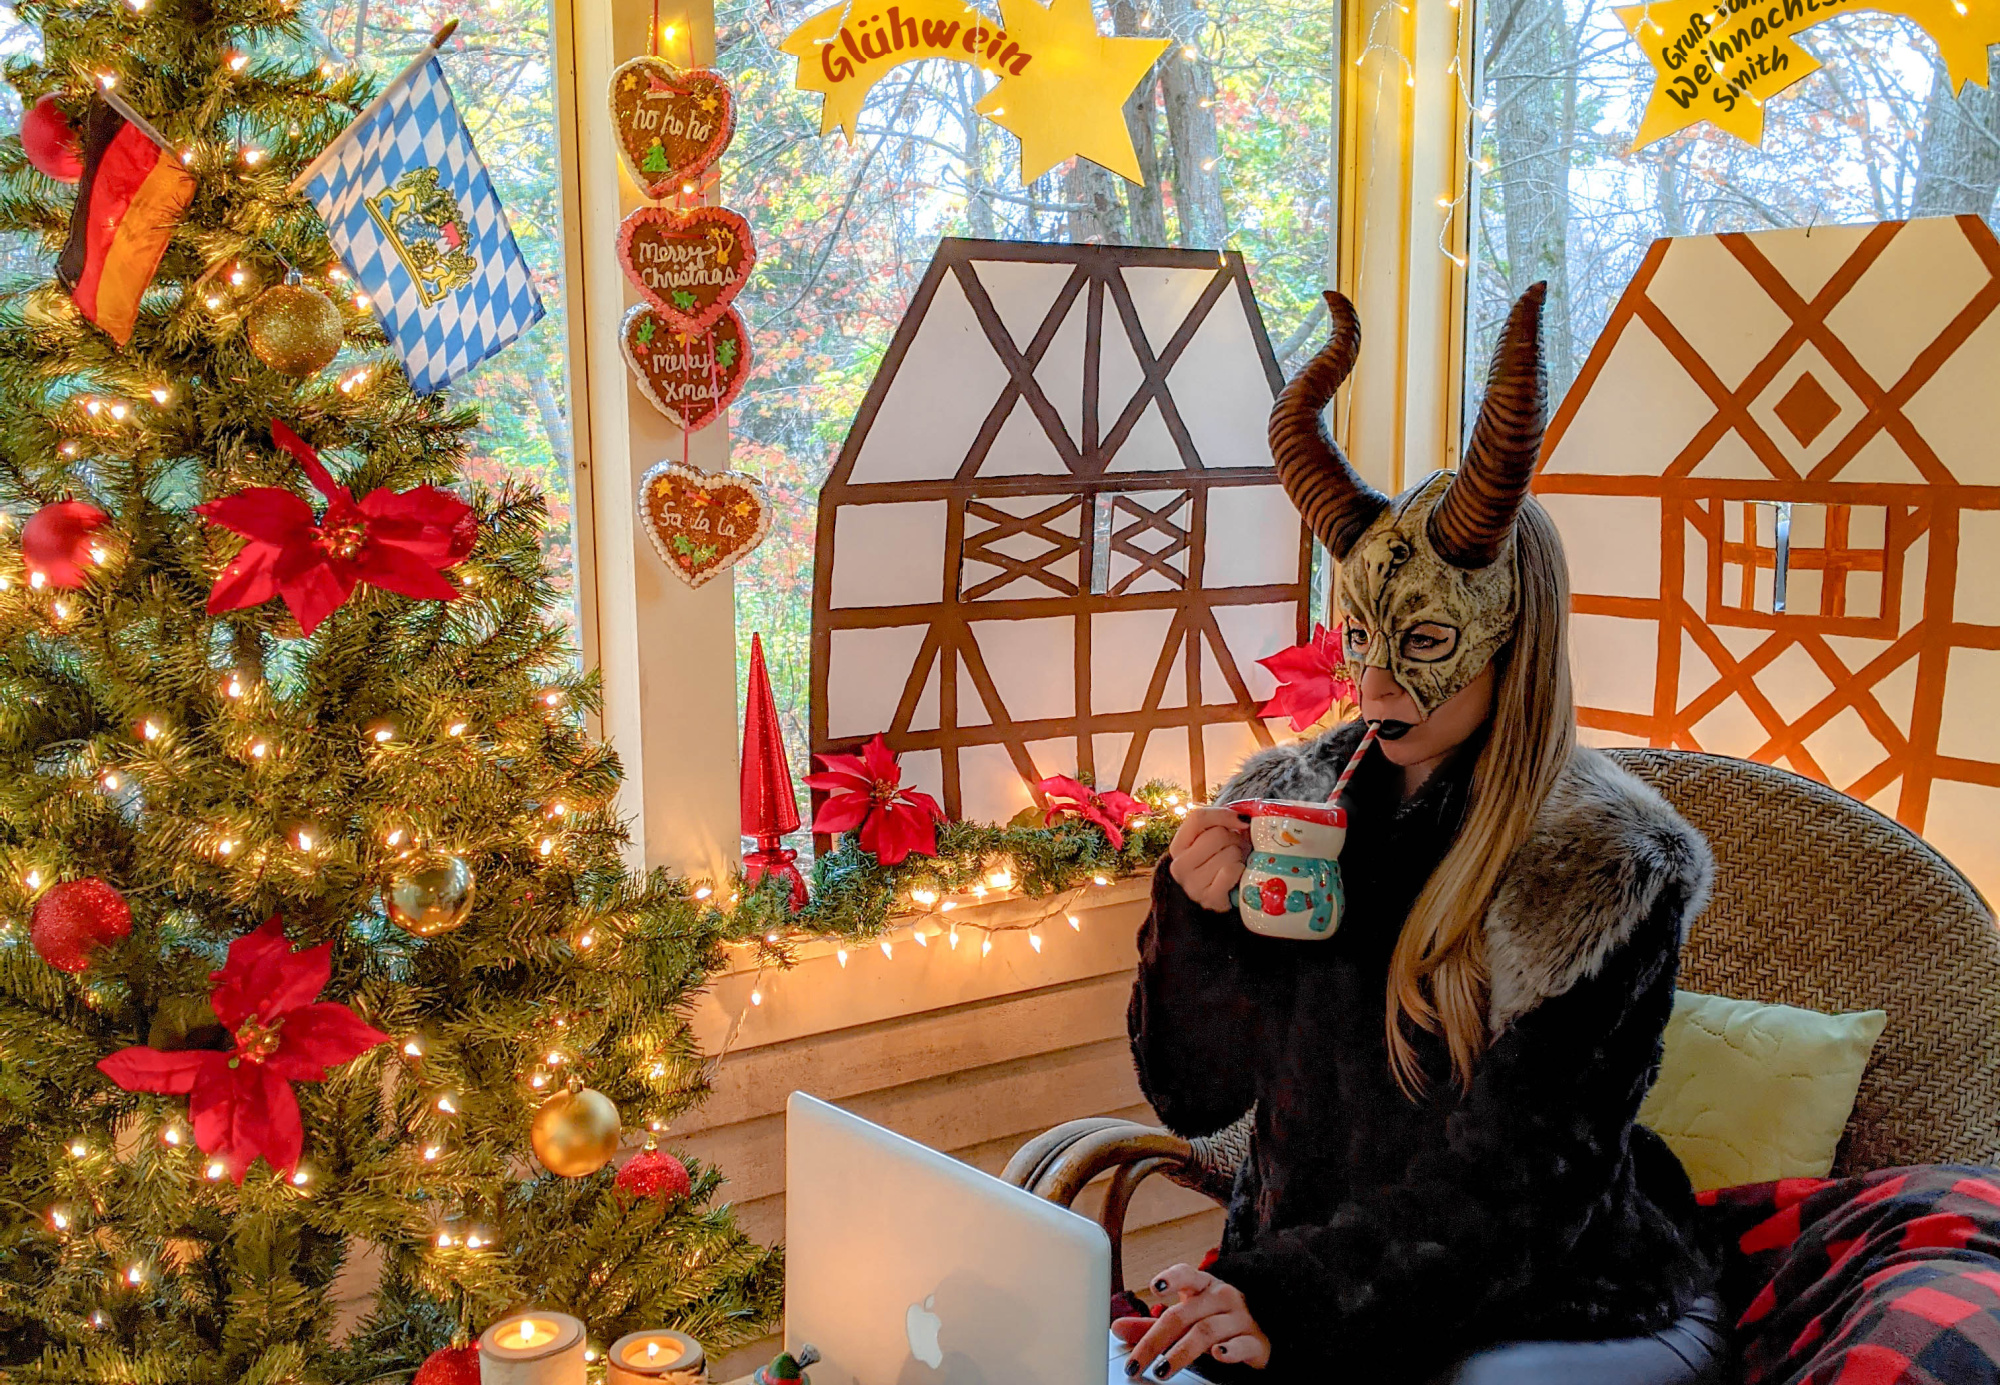 How To Recreate A German Christmas Market At Home In 5 Festive Steps - schwangau leaked roblox